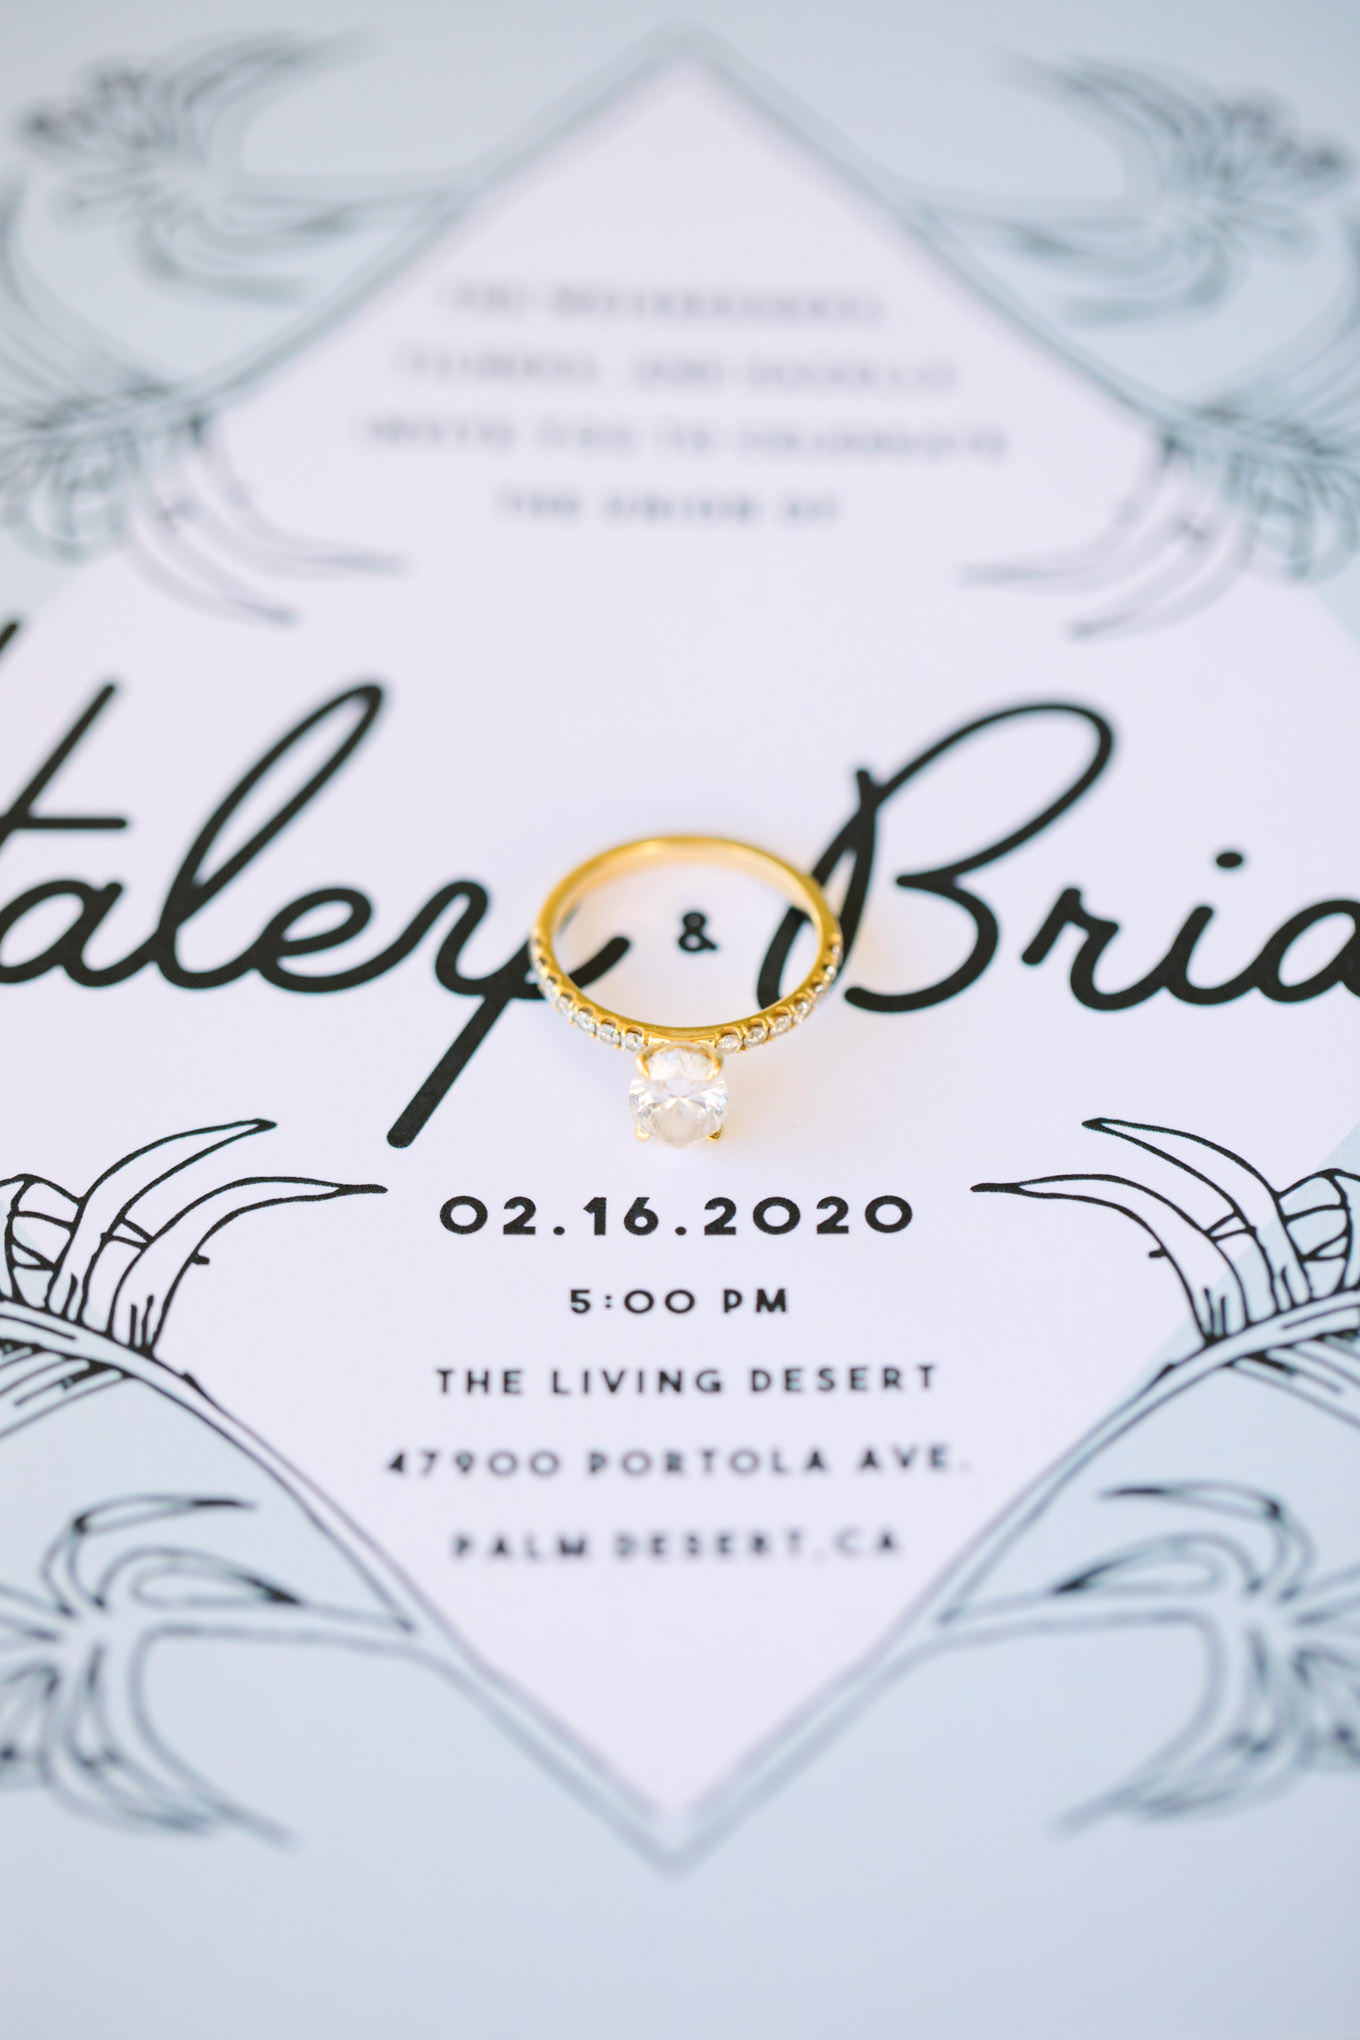 Classic engagement ring on wedding invitation | Living Desert Zoo & Gardens wedding with unique details | Elevated and colorful wedding photography for fun-loving couples in Southern California |  #PalmSprings #palmspringsphotographer #gardenwedding #palmspringswedding  Source: Mary Costa Photography | Los Angeles wedding photographer 